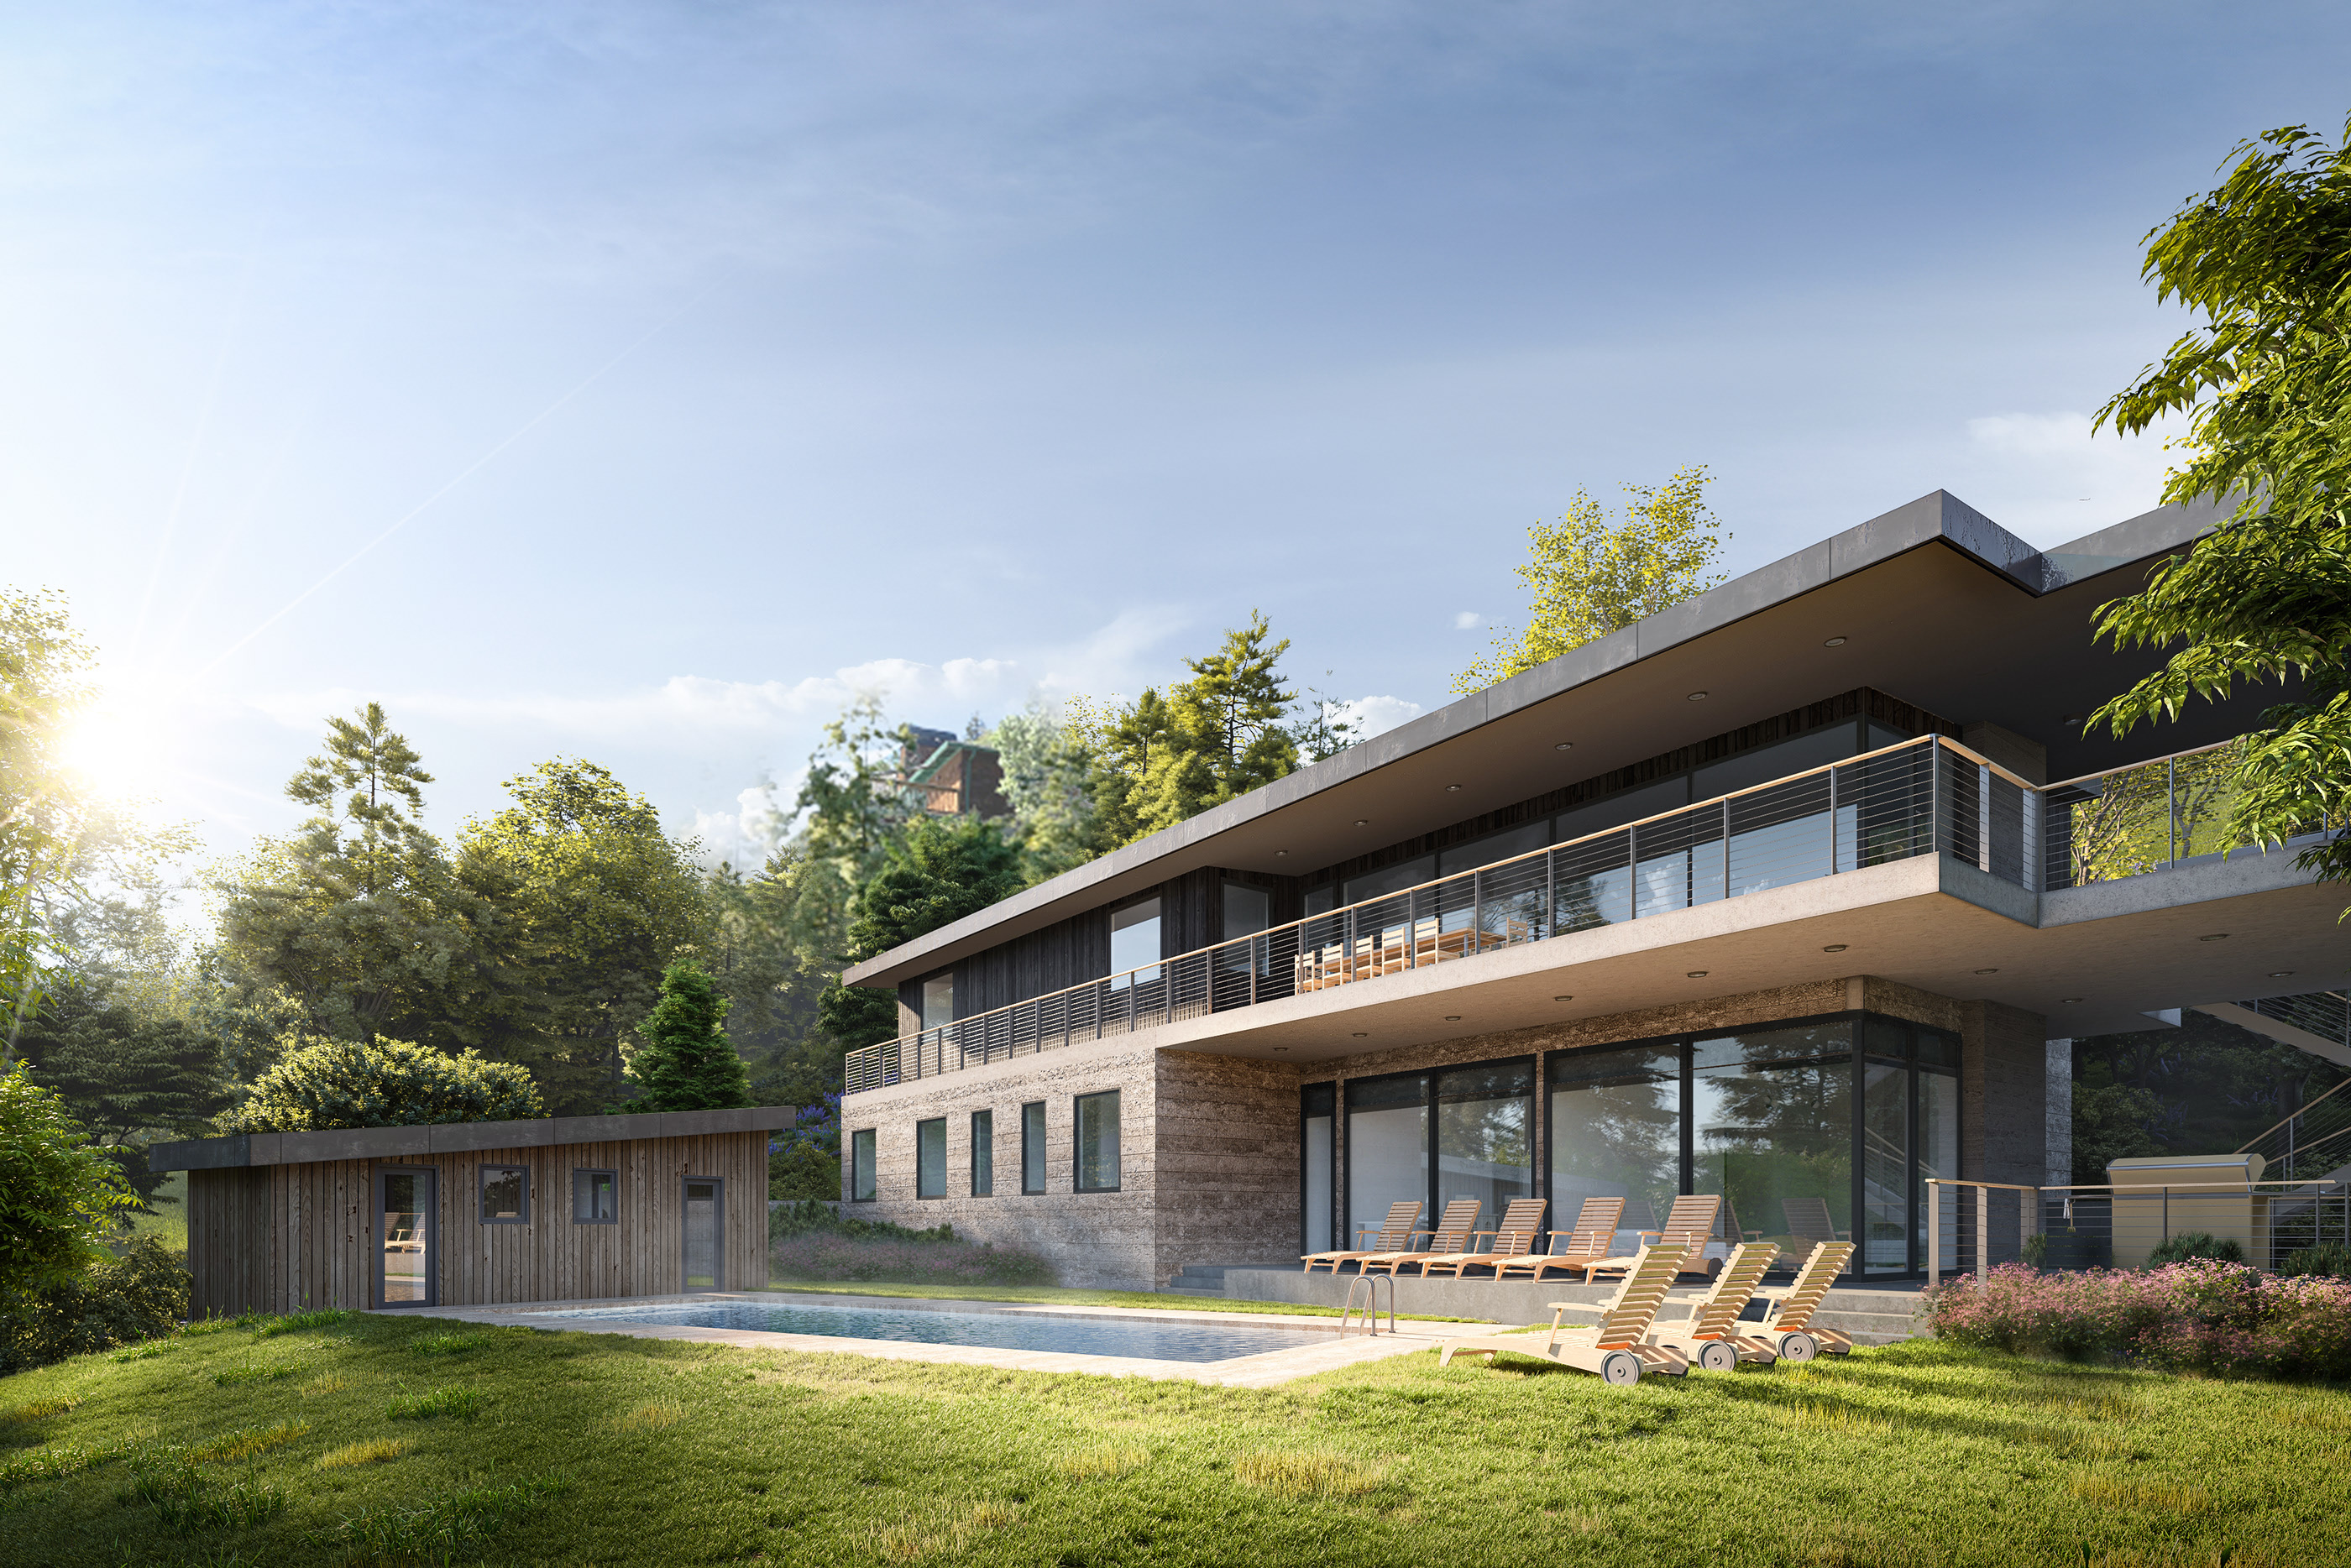 A CGI of a building in a forest area. | Behance